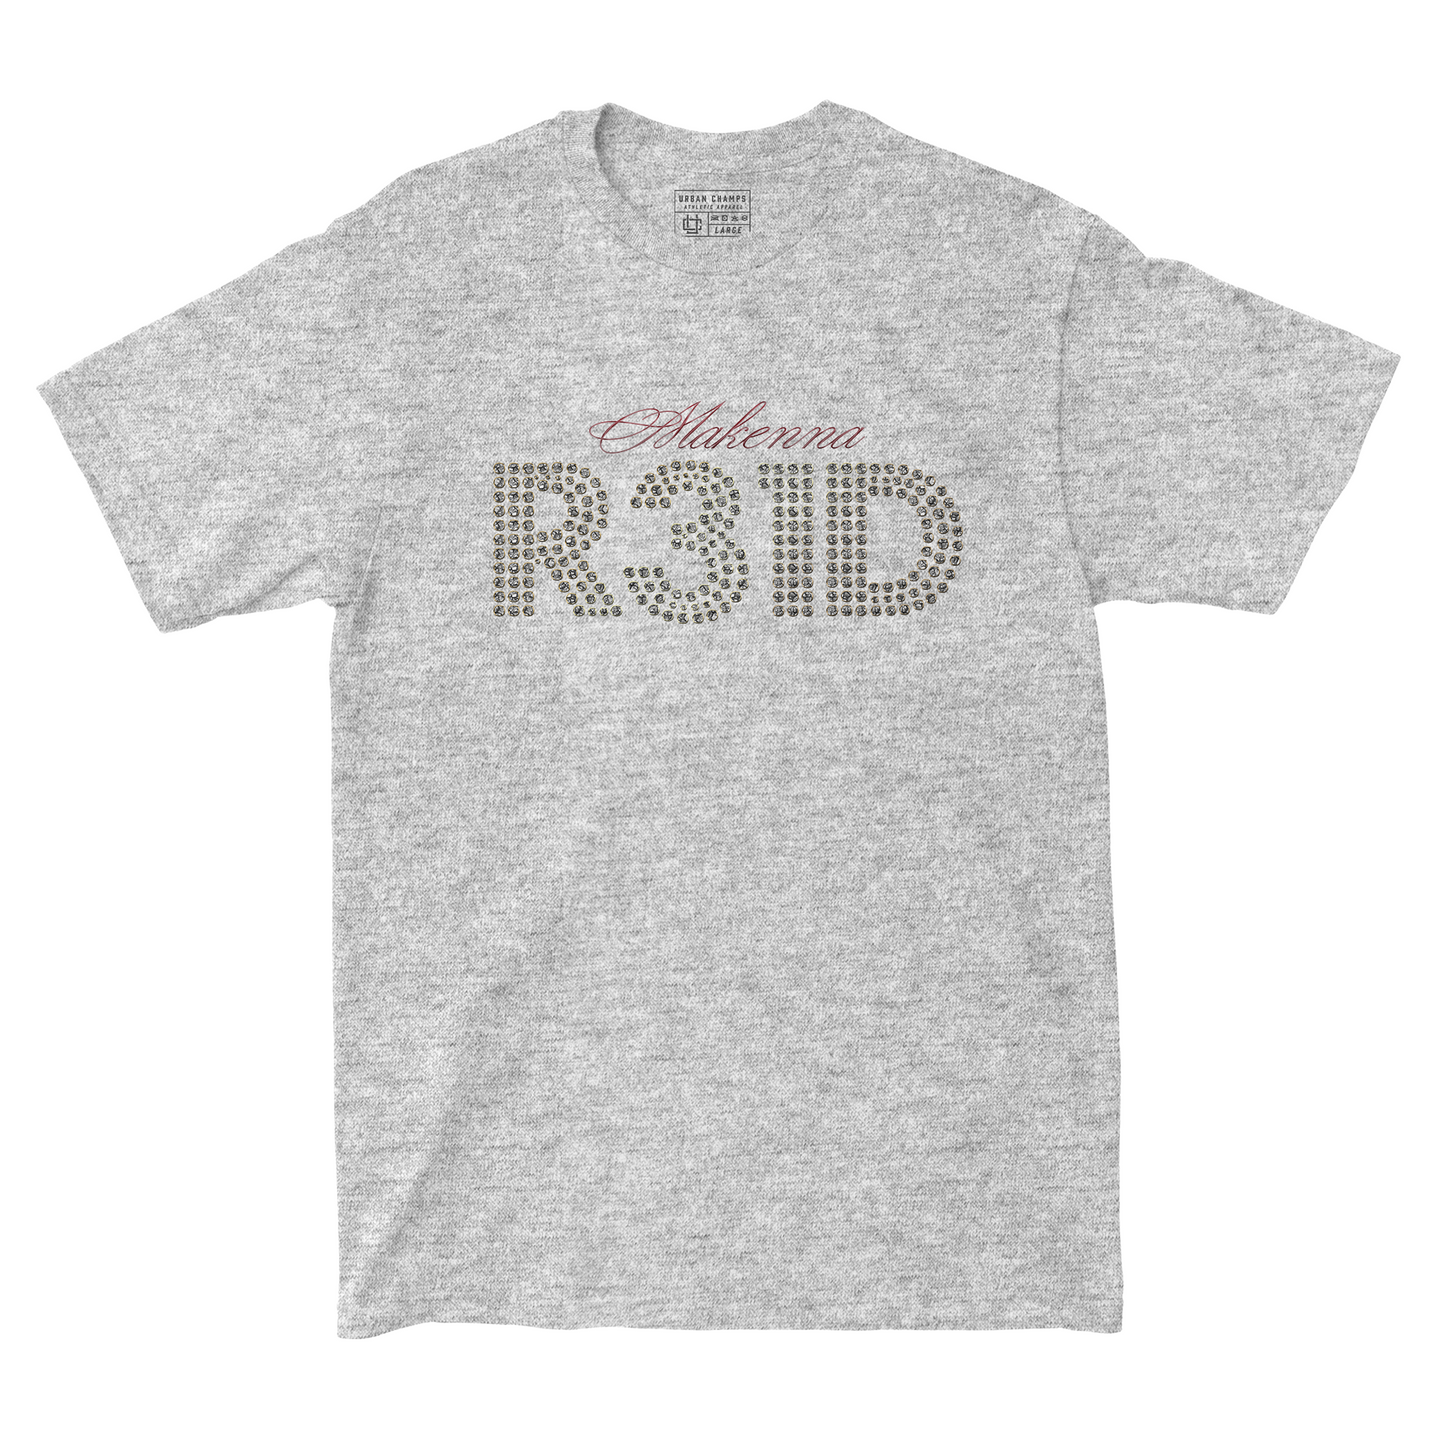 EXCLUSIVE RELEASE: Makenna R31D Signature Grey Tee